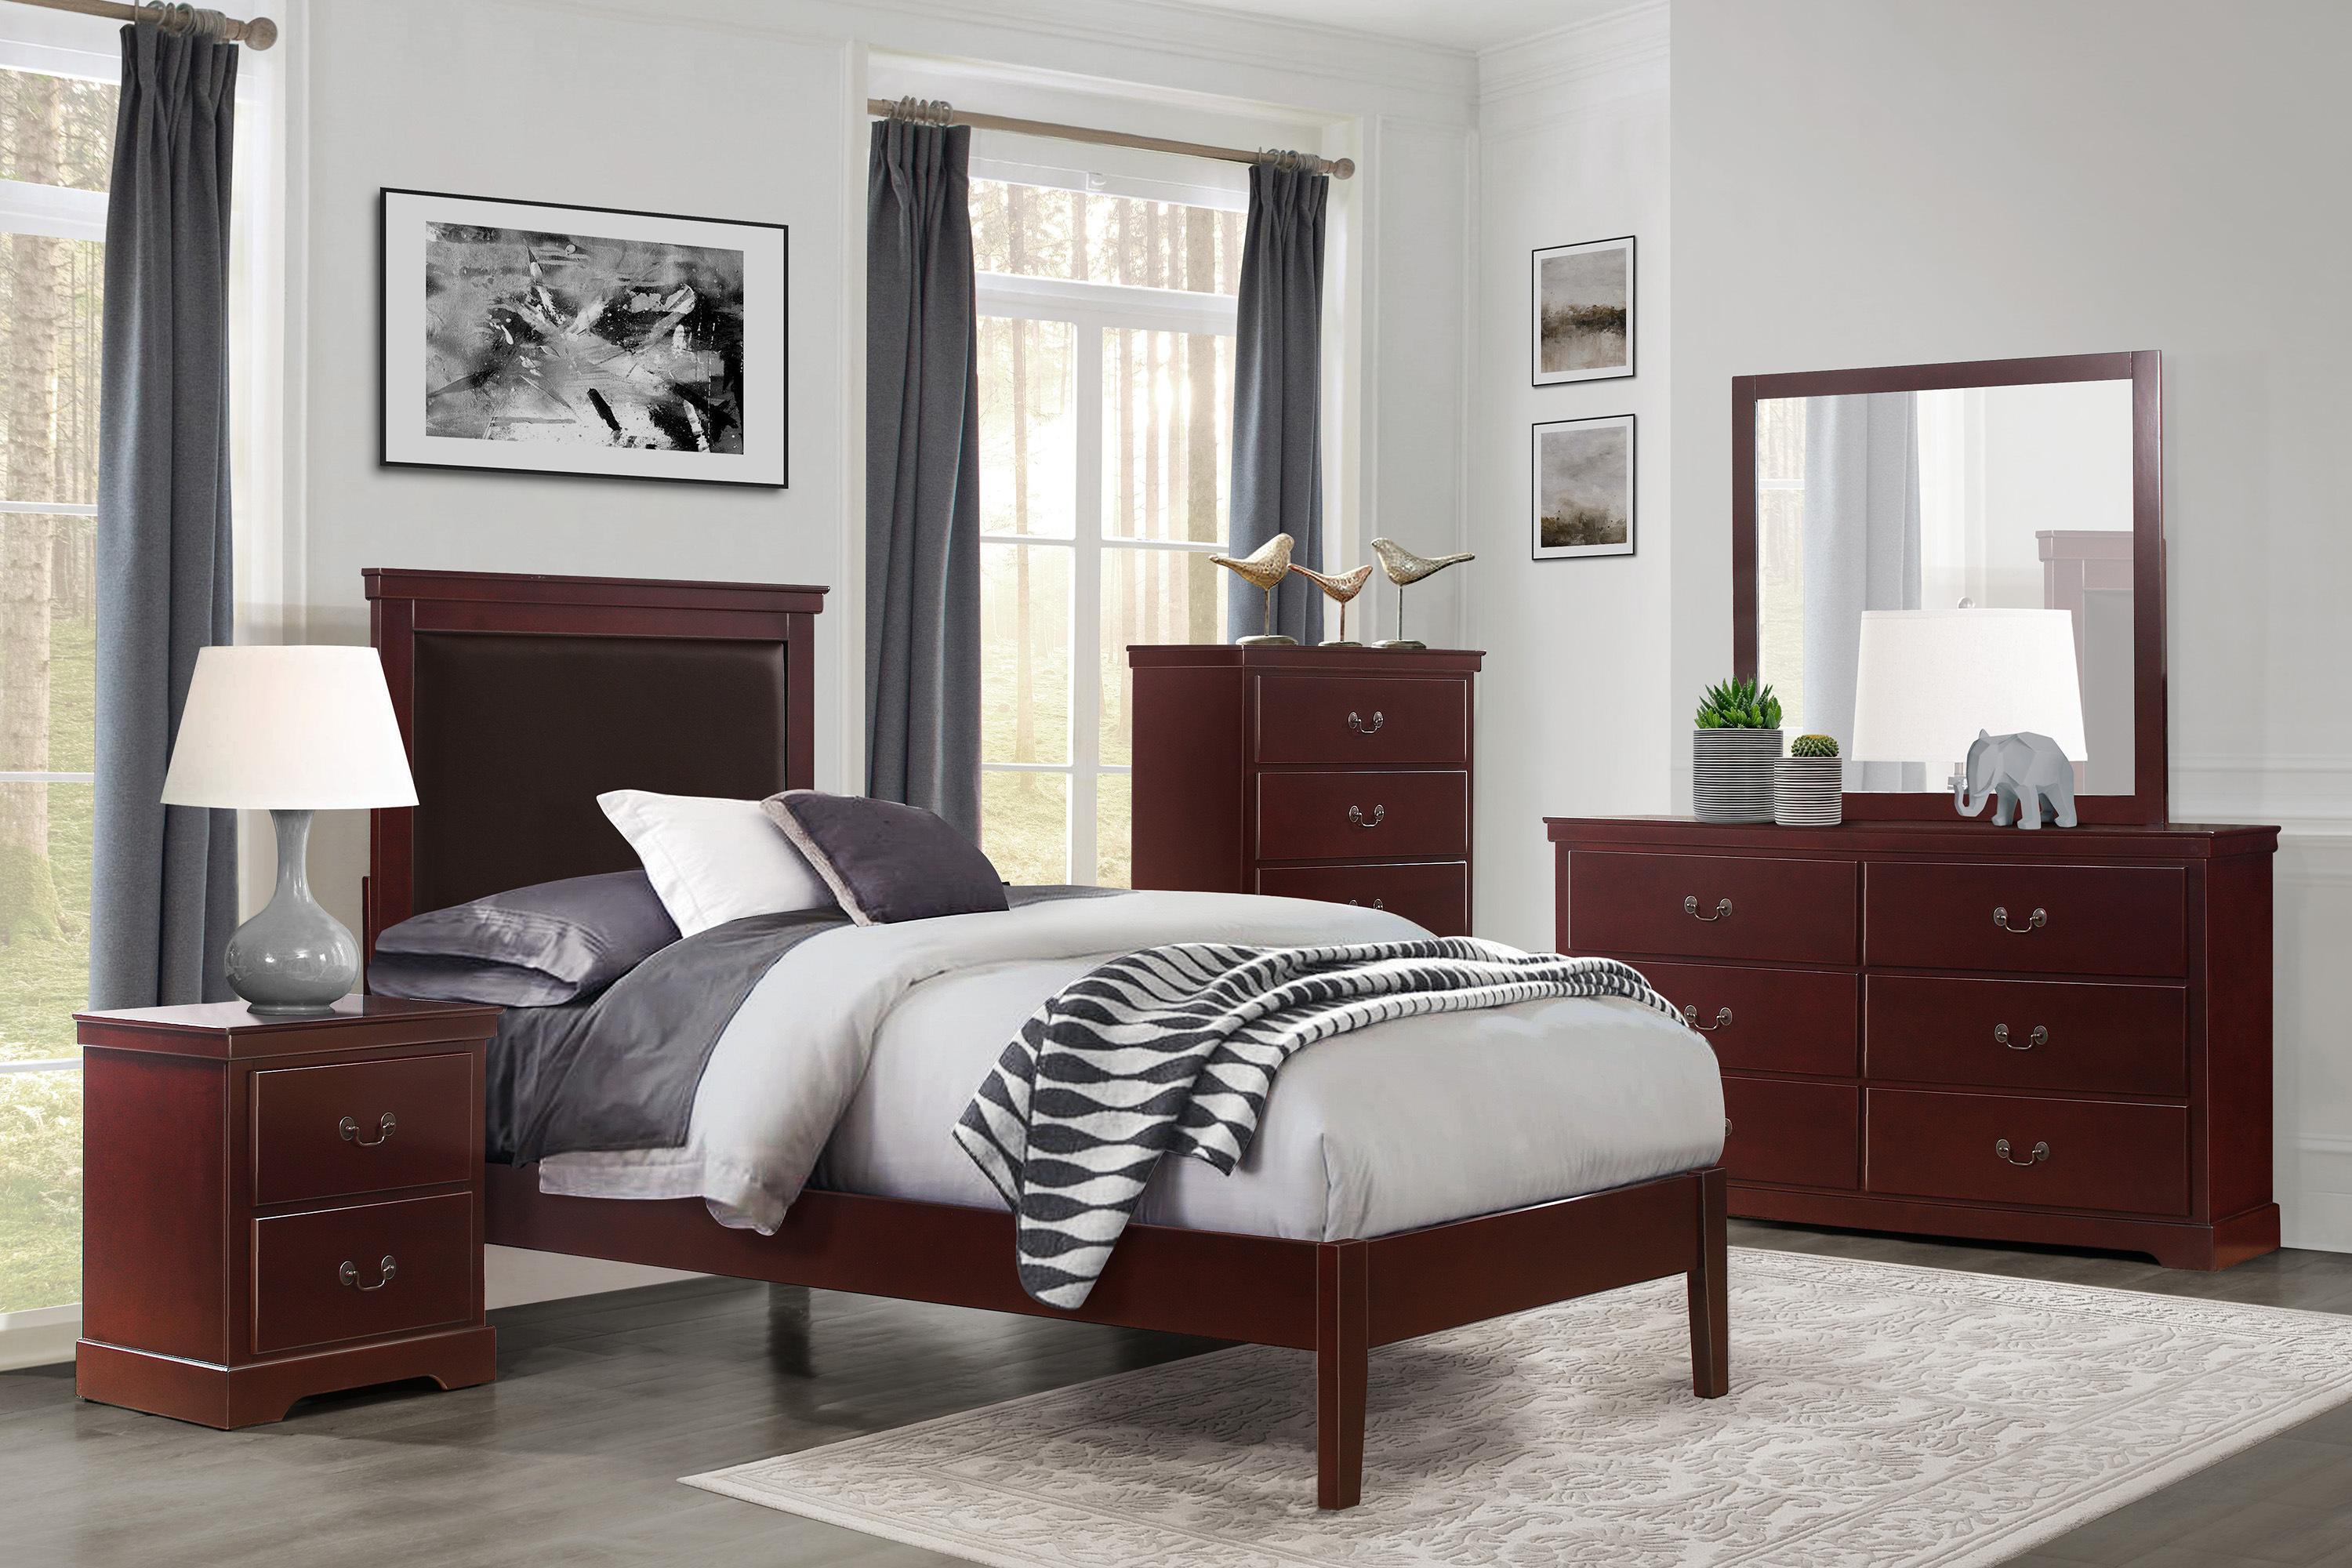 Modern Bedroom Set 1519CHT-1-6PC Seabright 1519CHT-1-6PC in Cherry Faux Leather